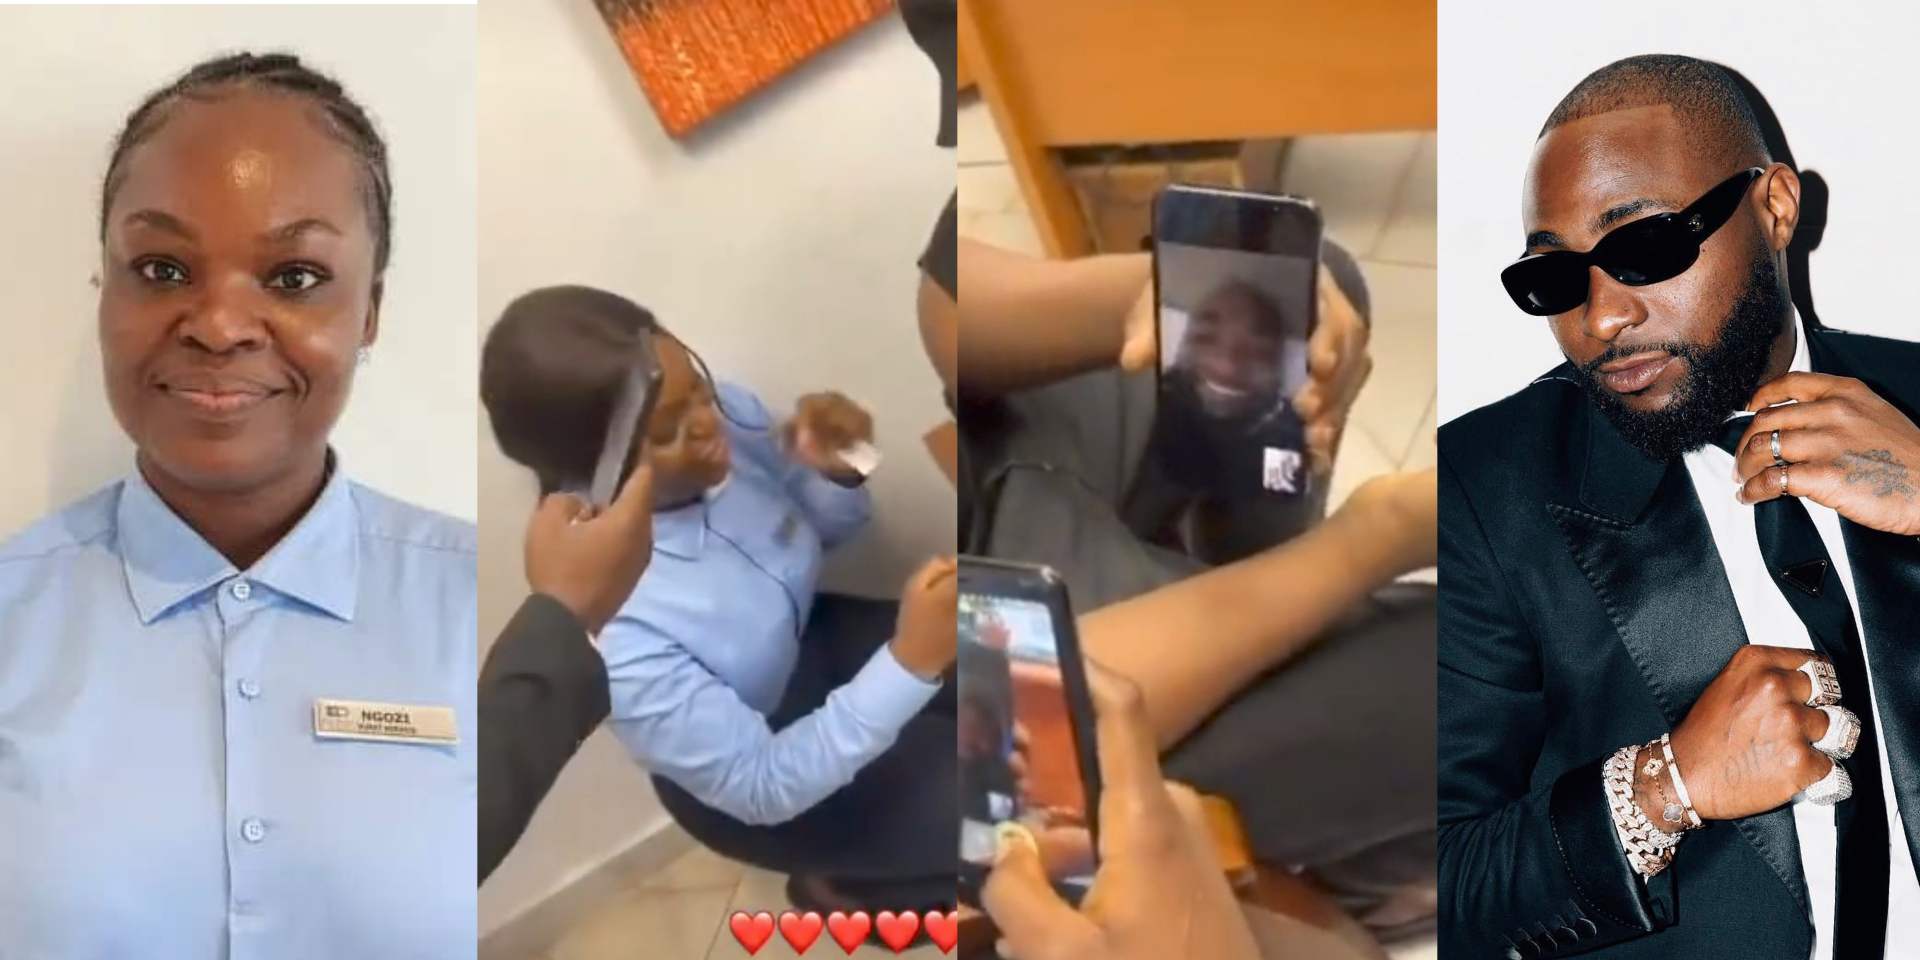 "I'm overwhelmed" – Hotel staff who returned $70K thanks Davido as he reaches out, prays for him [Video]